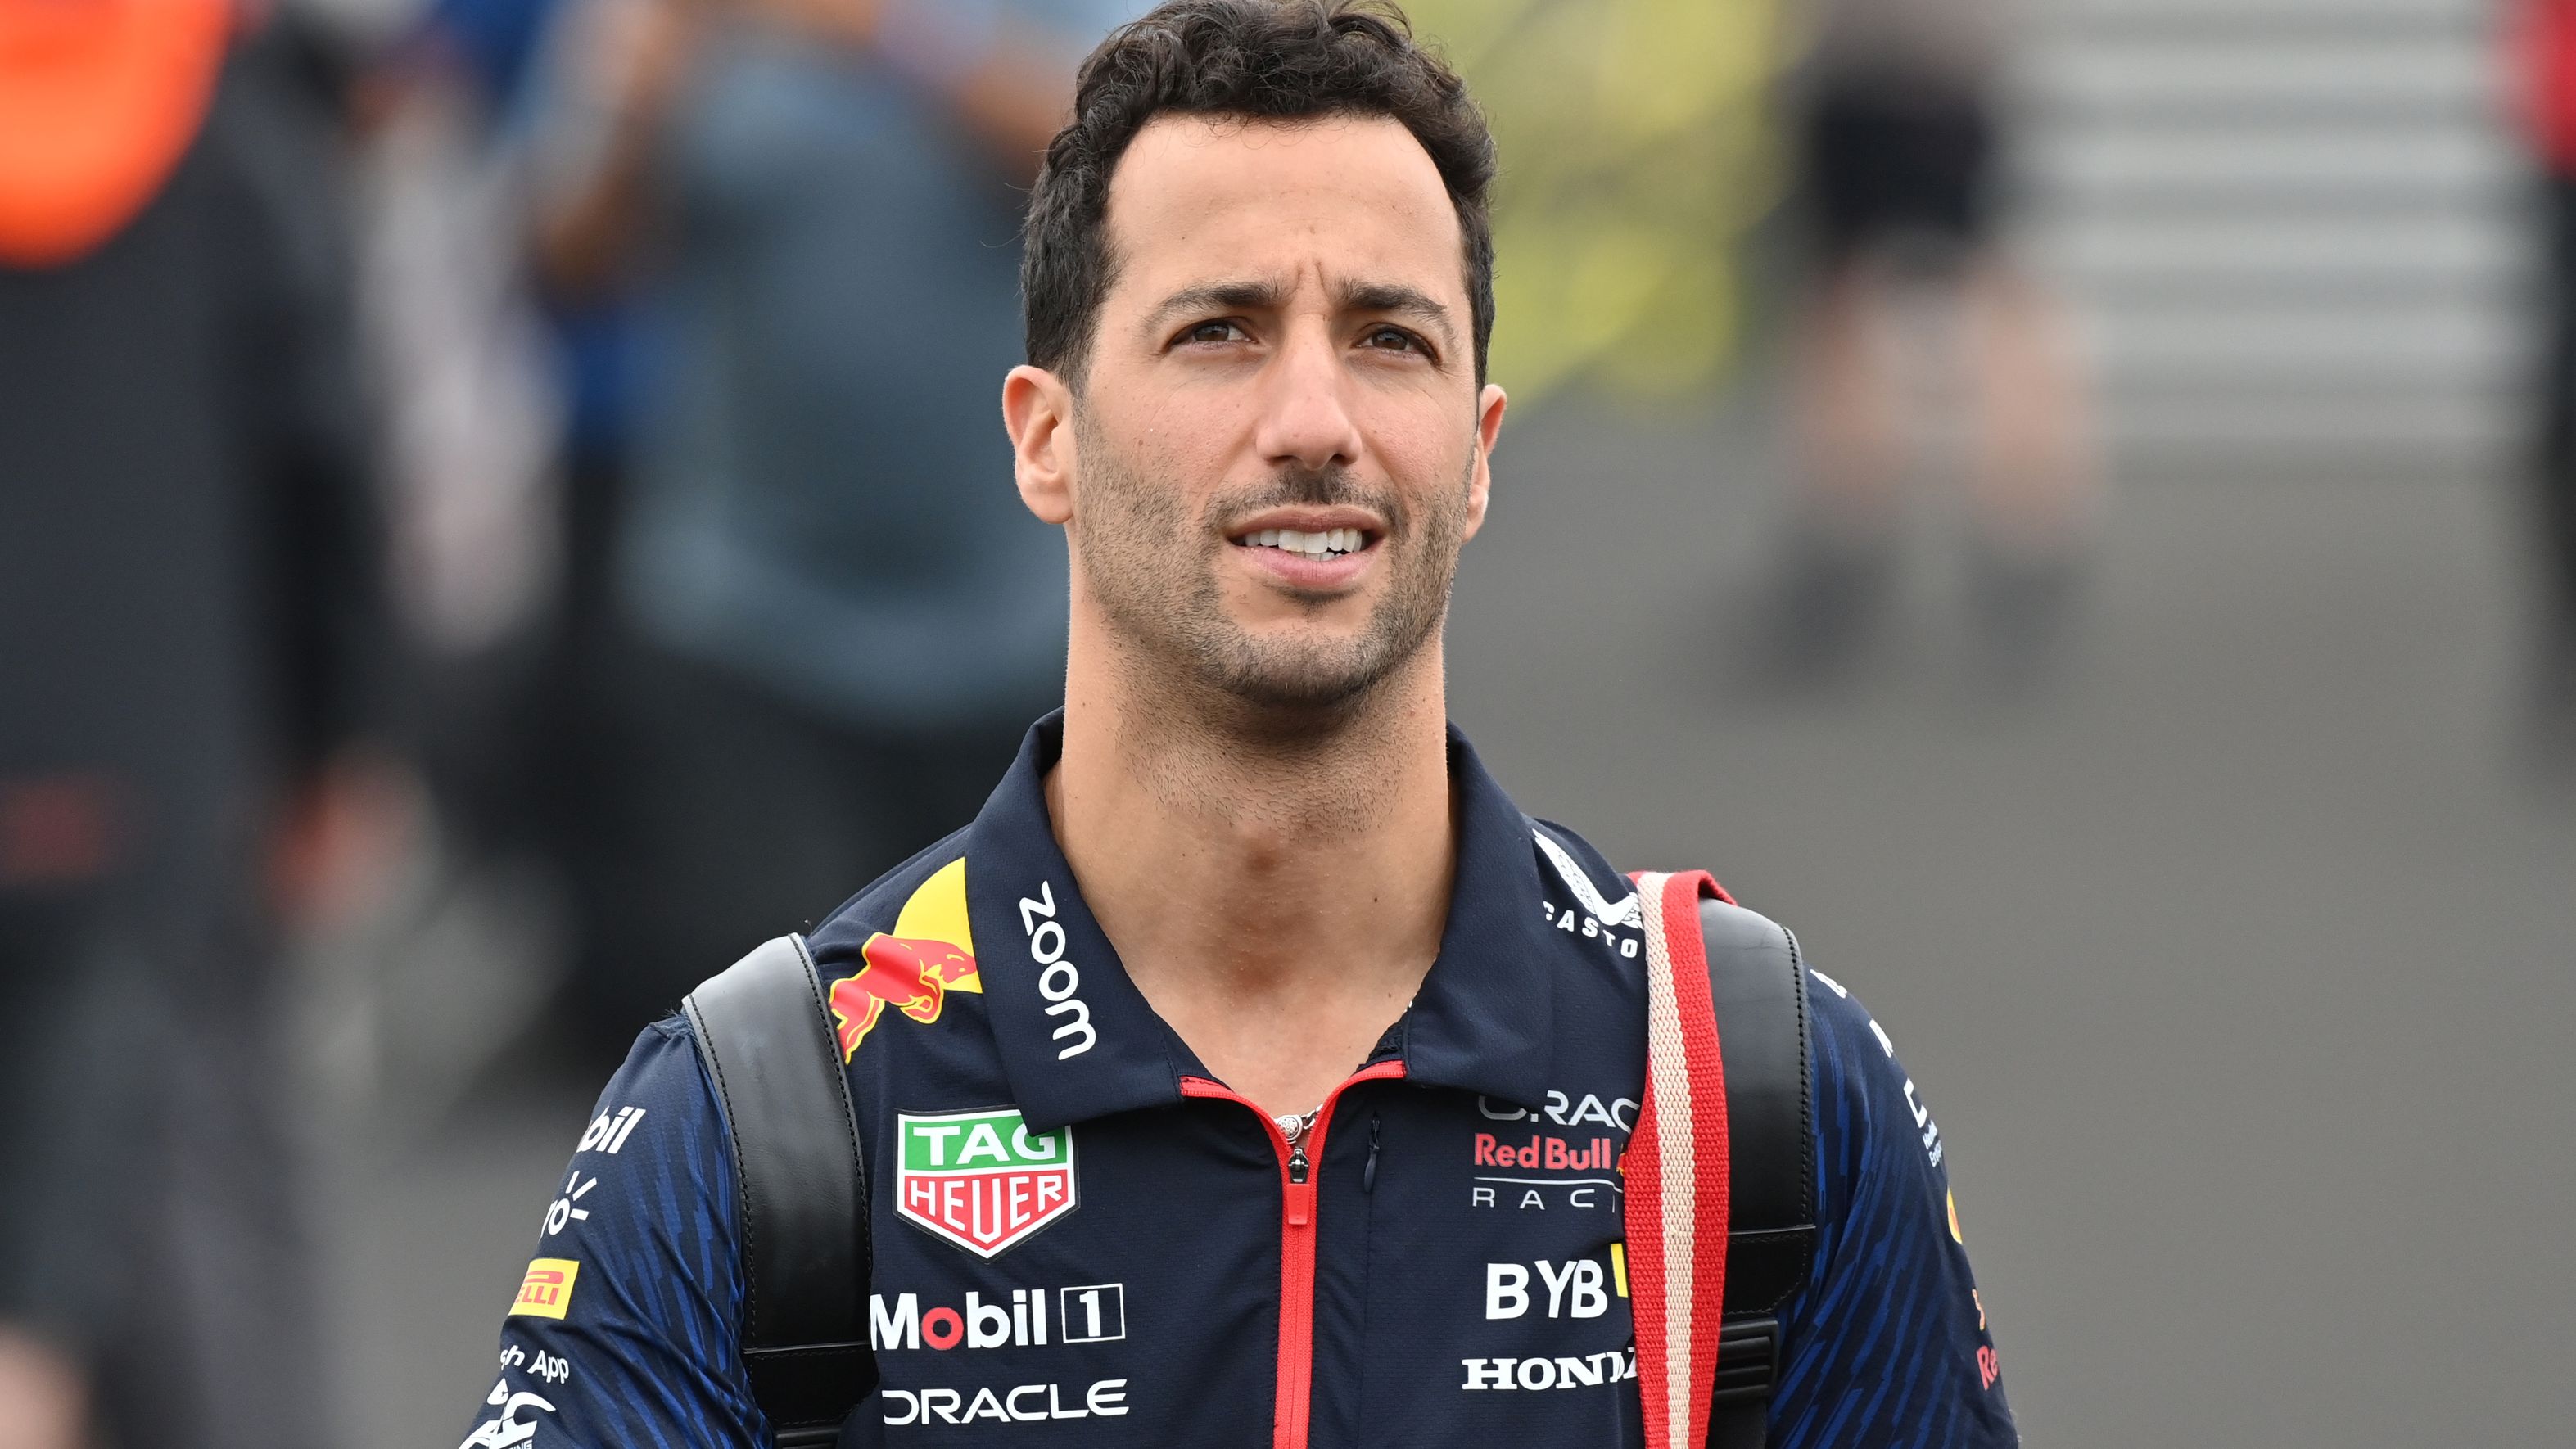 Daniel Ricciardo looks on during practice ahead of the F1 Grand Prix of Canada at Circuit Gilles Villeneuve on June 16, 2023 in Montreal, Quebec. (Photo by Paolo Pedicelli ATPImages/Getty Images)